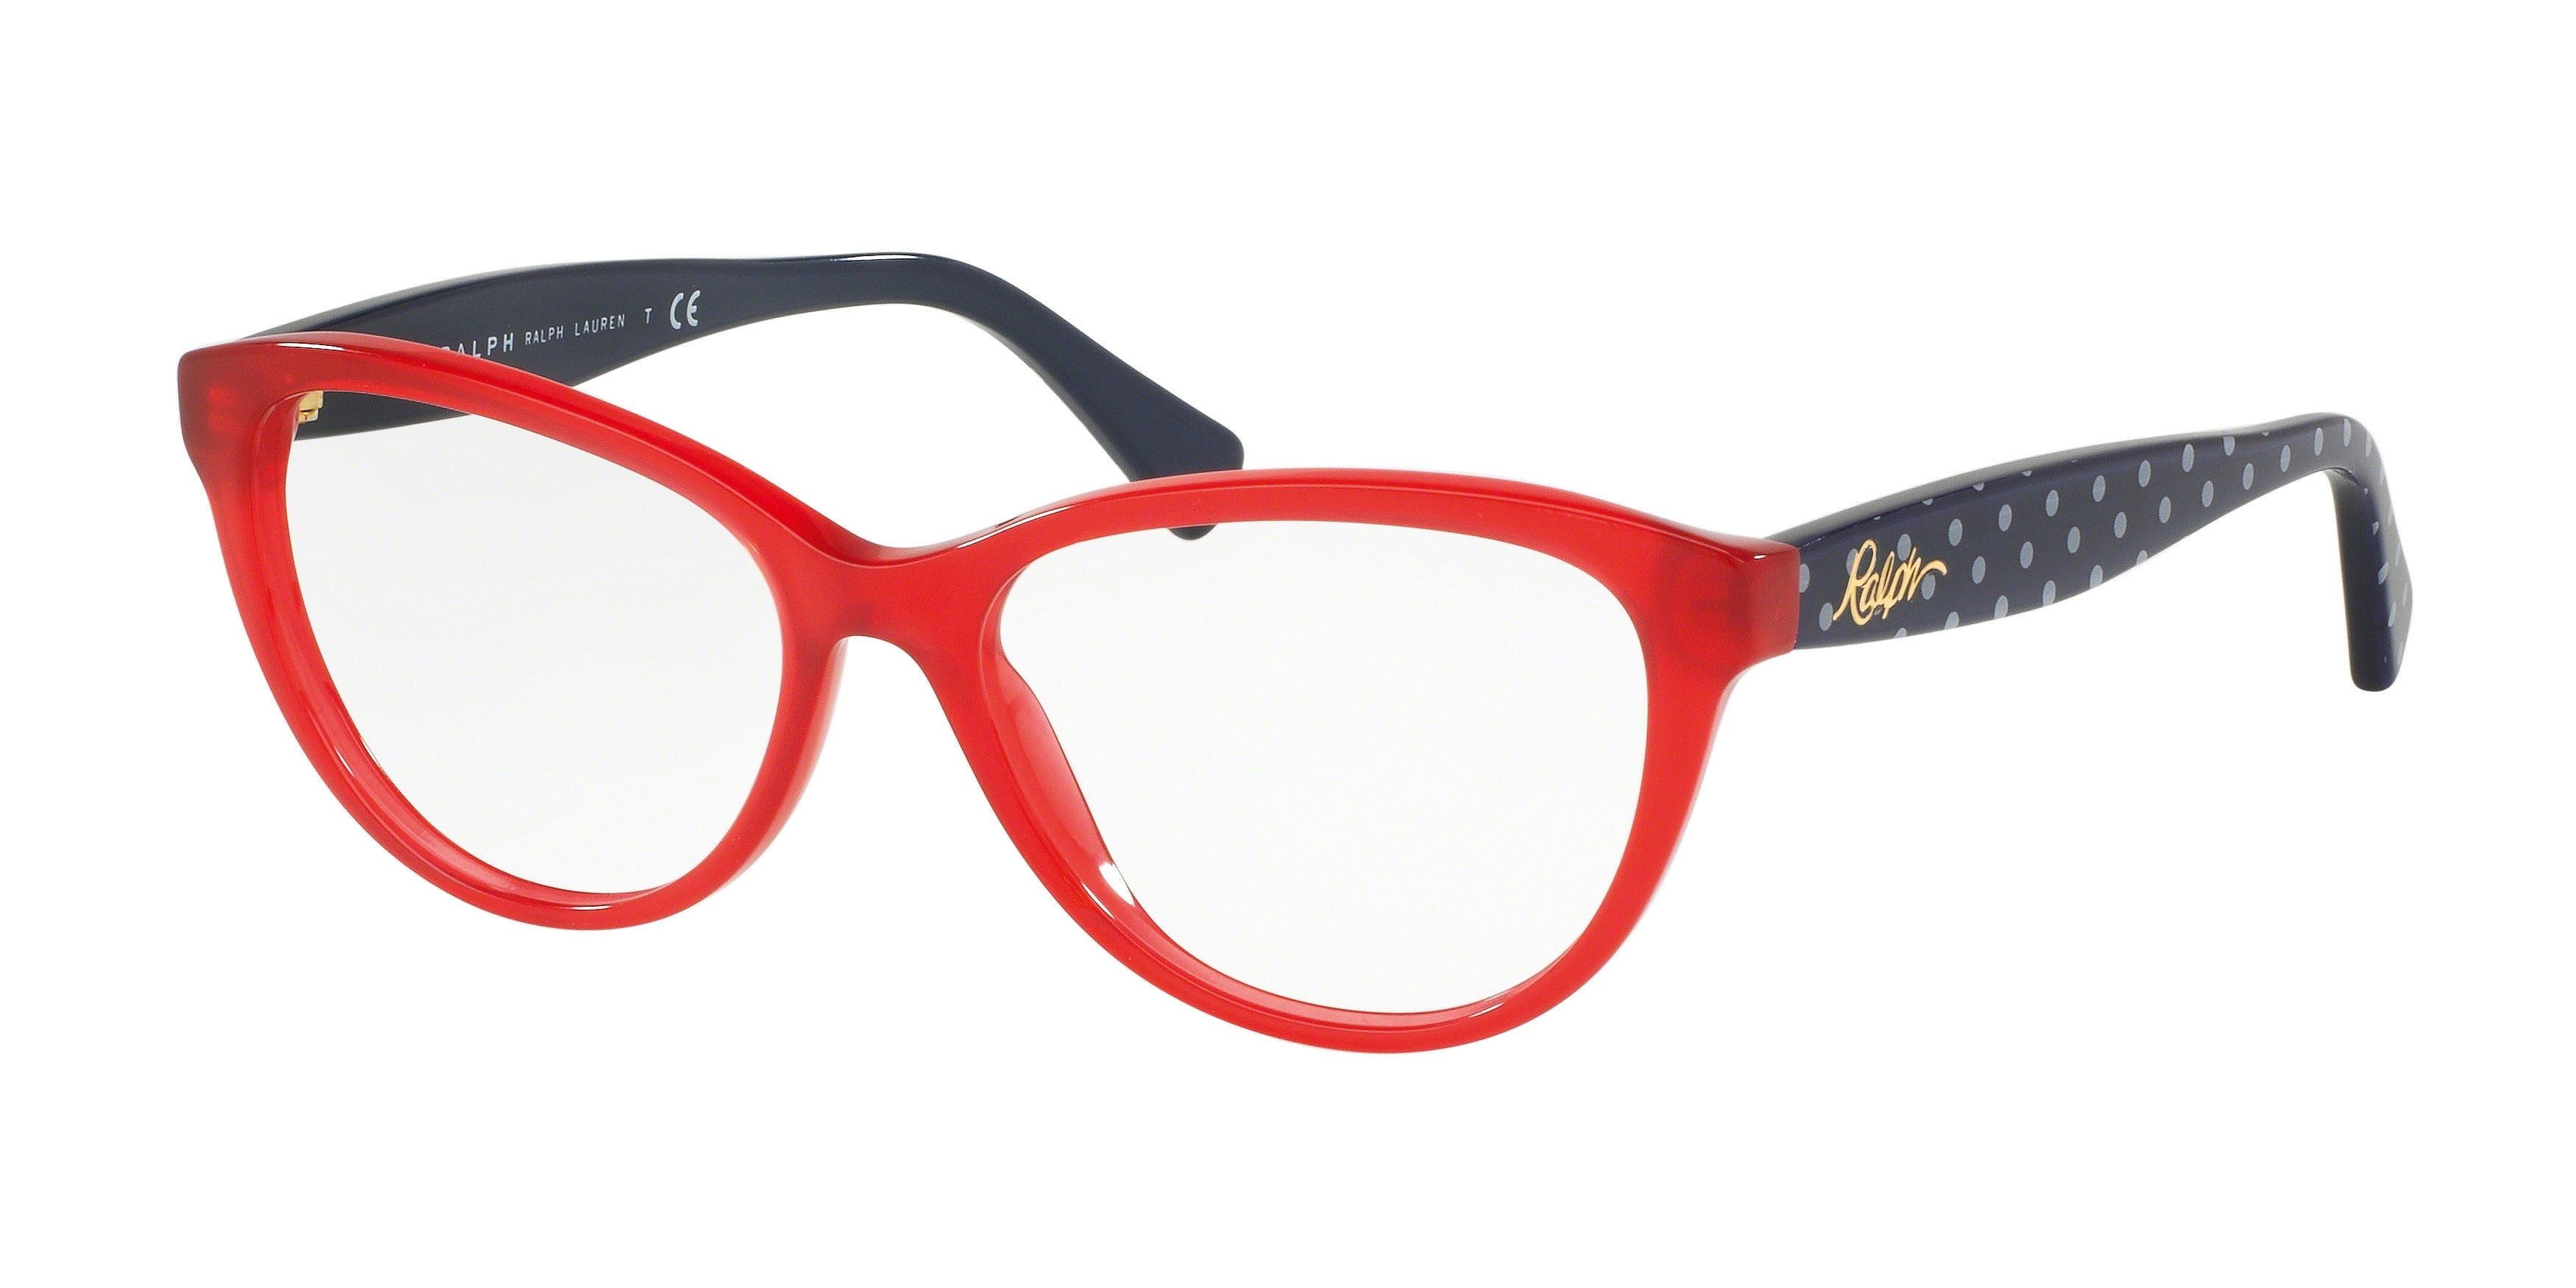 Ralph RA7075 Cat Eye Eyeglasses  3161-Shiny Opaline Red 52-140-16 - Color Map Red